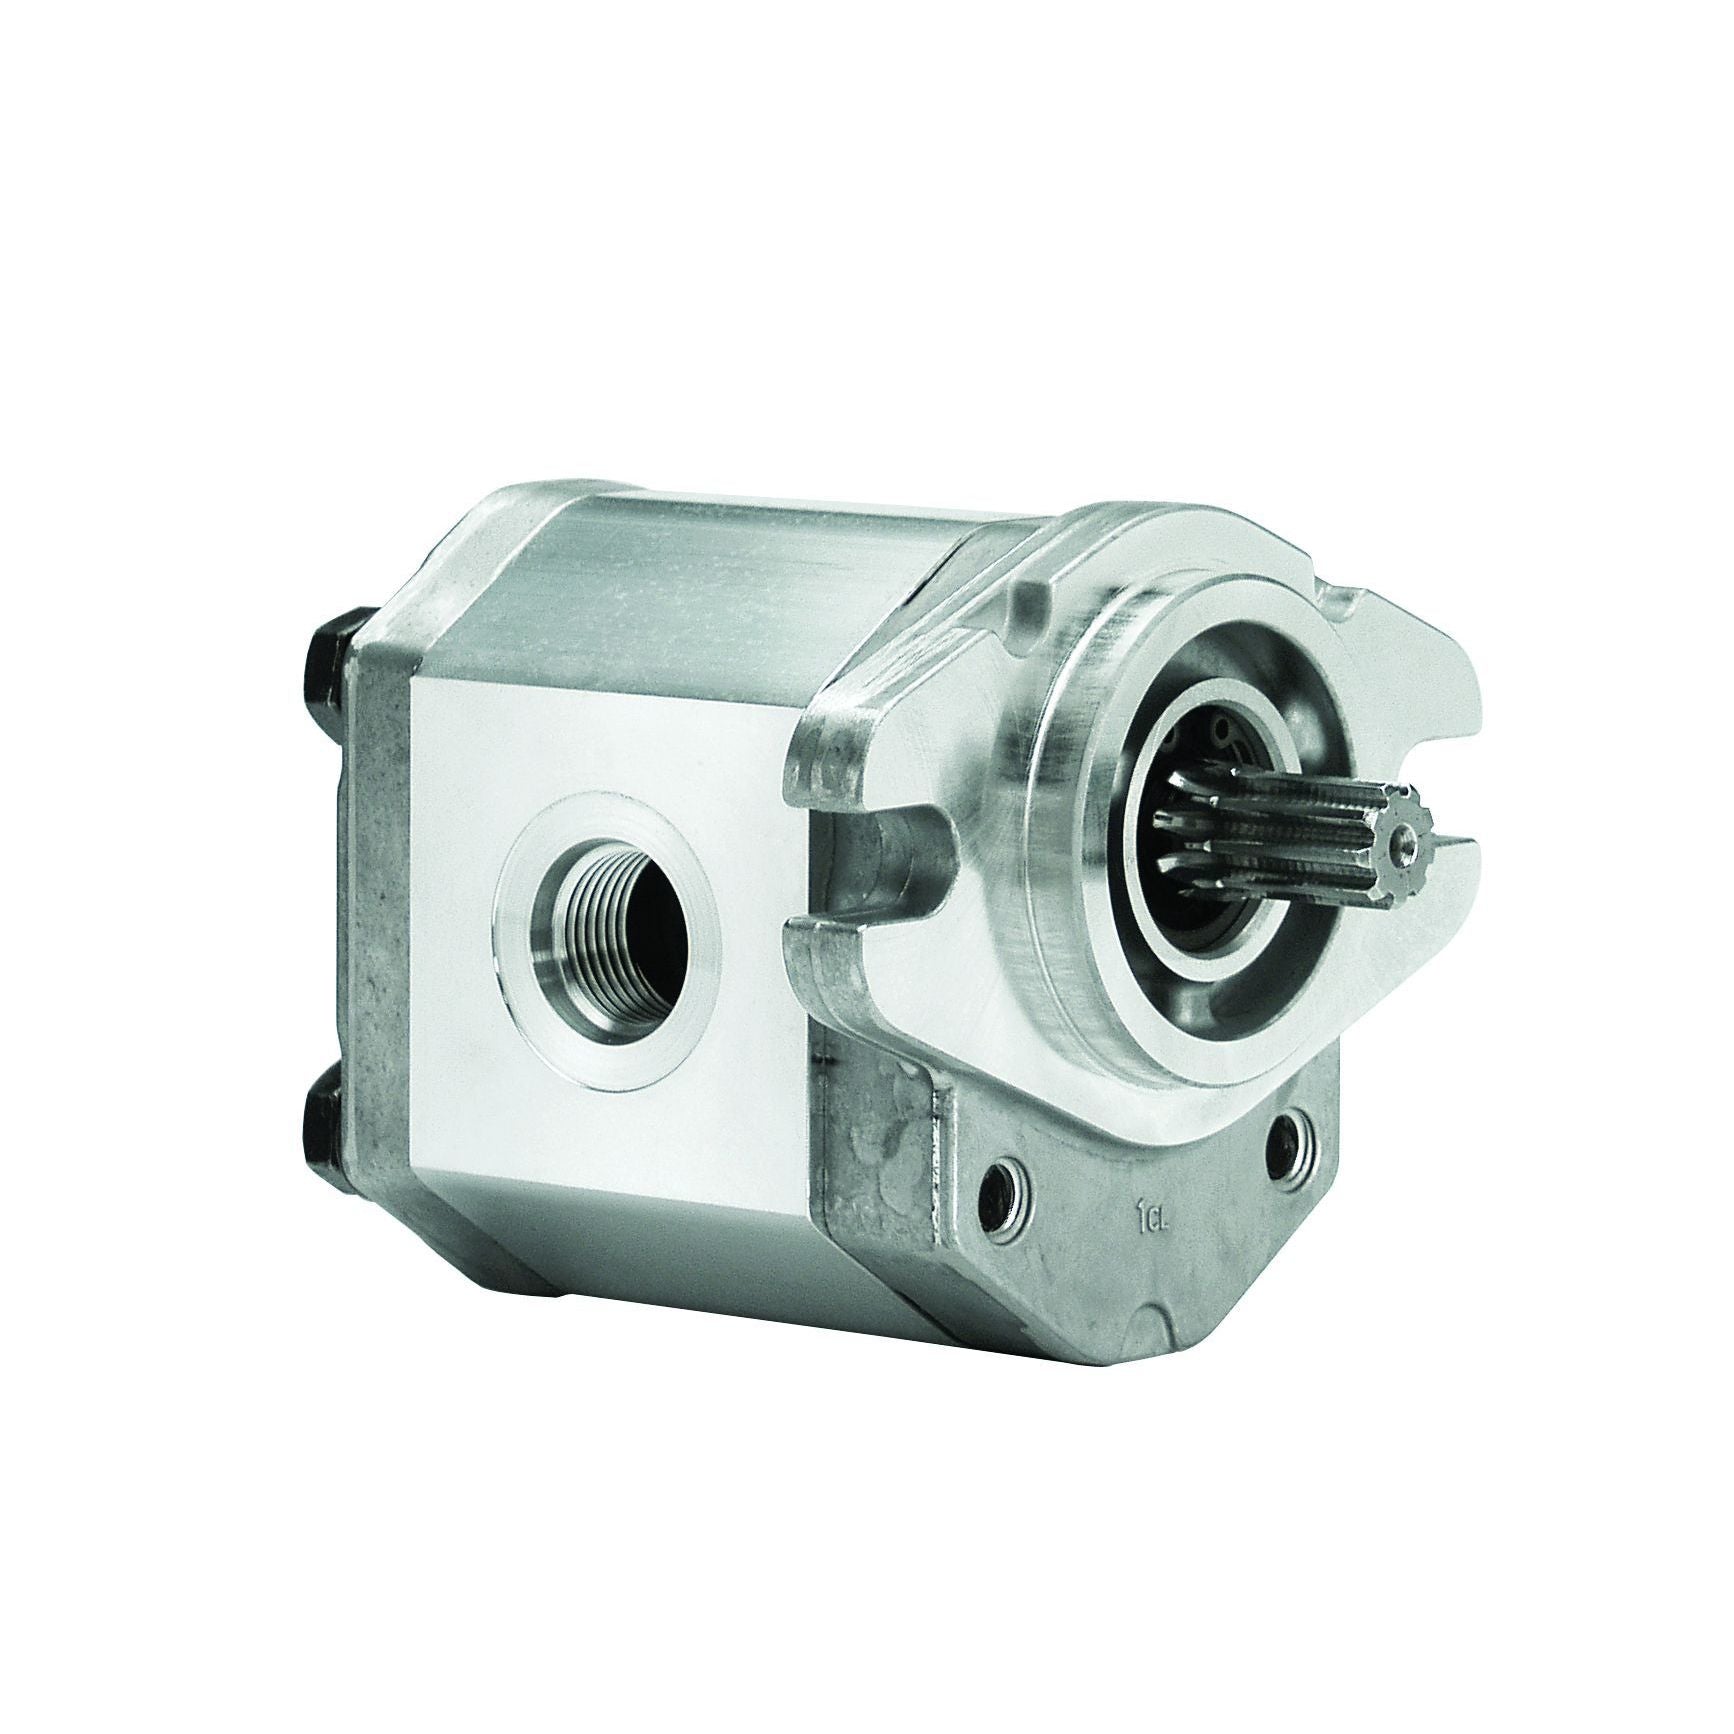 ALP3A-S-110-S1-FA : Marzocchi Gear Pump, CCW, 71cc (4.331in3), 33.75 GPM, 2465psi, 2500 RPM, #24 SAE (1.5") In, #12 SAE (3/4") Out, Splined Shaft 13T 16/32DP, SAE B 2-Bolt Mount